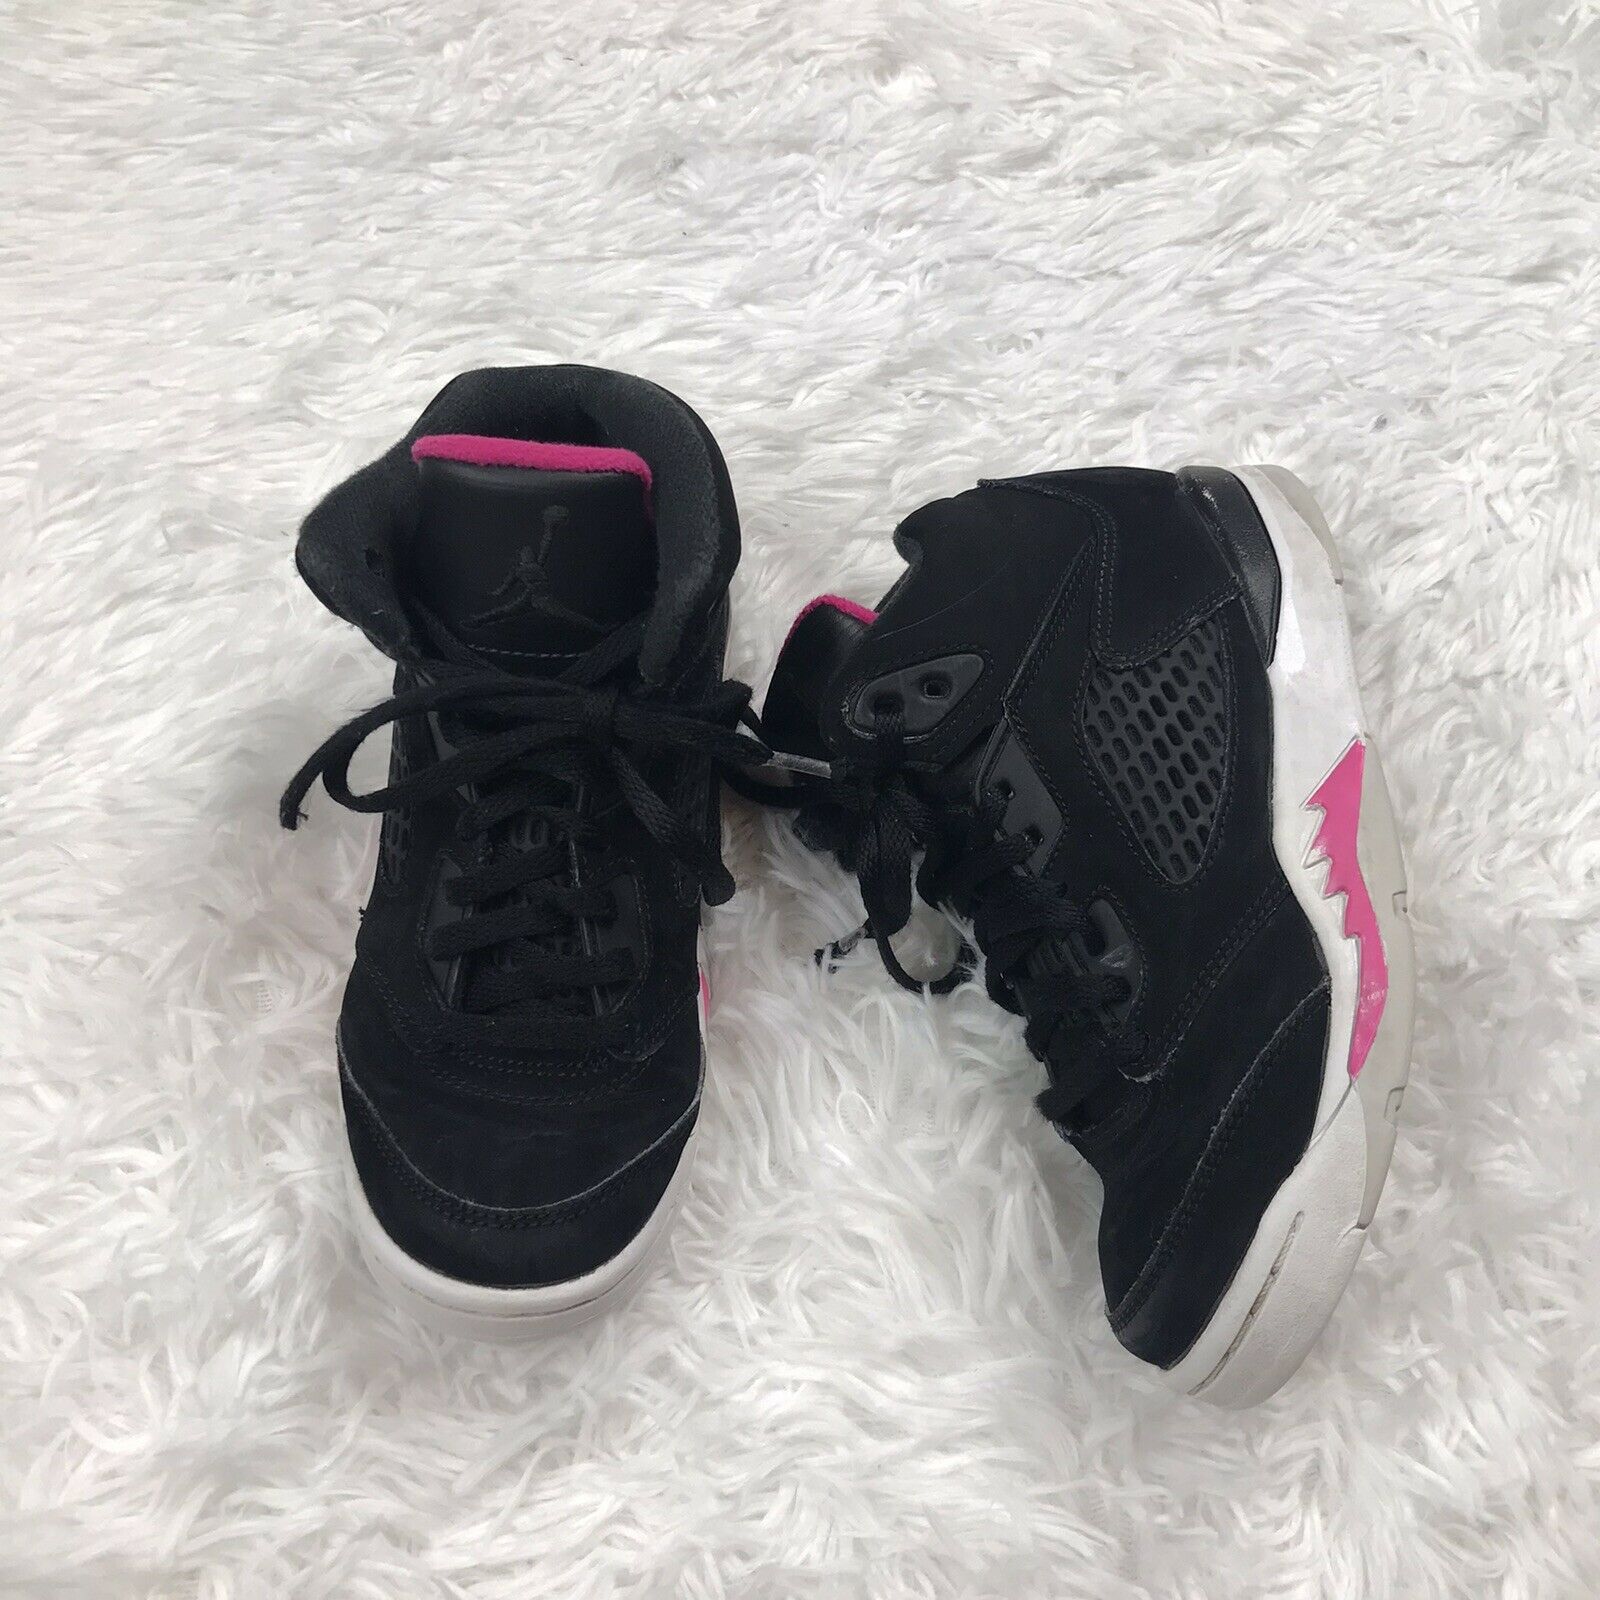 Nike Air Jordan Retro 5 Youth Shoes Size 1Y "Deadly Pink" Black Pink 440893-029